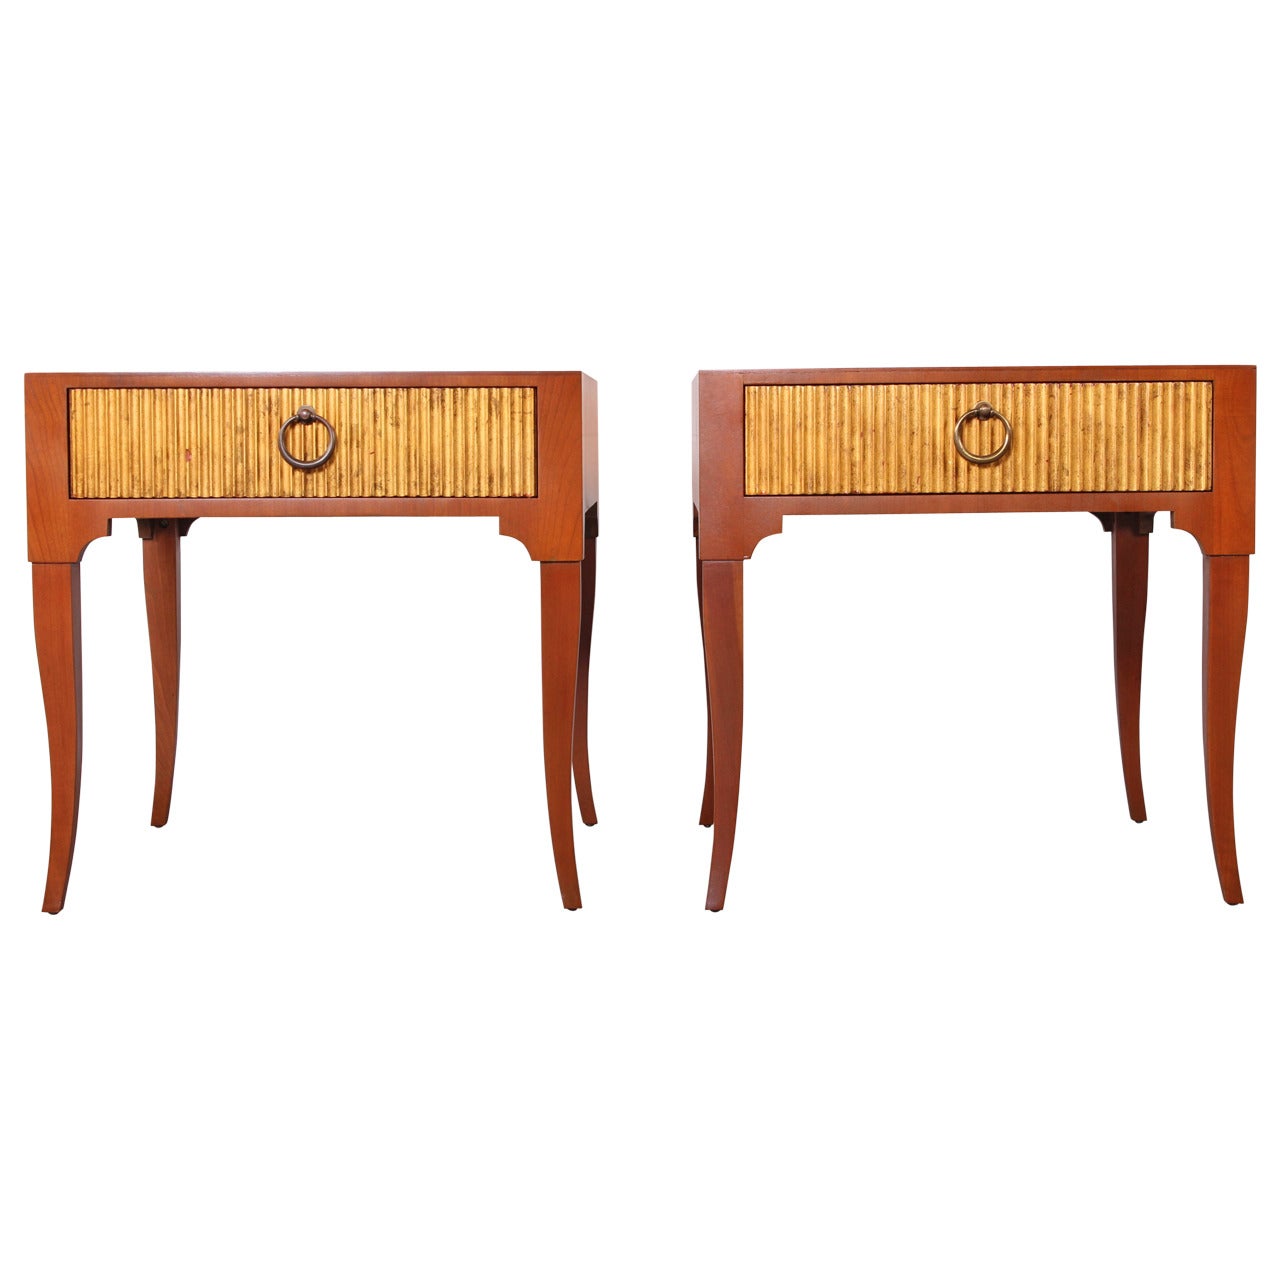 Pair of End Tables by Baker